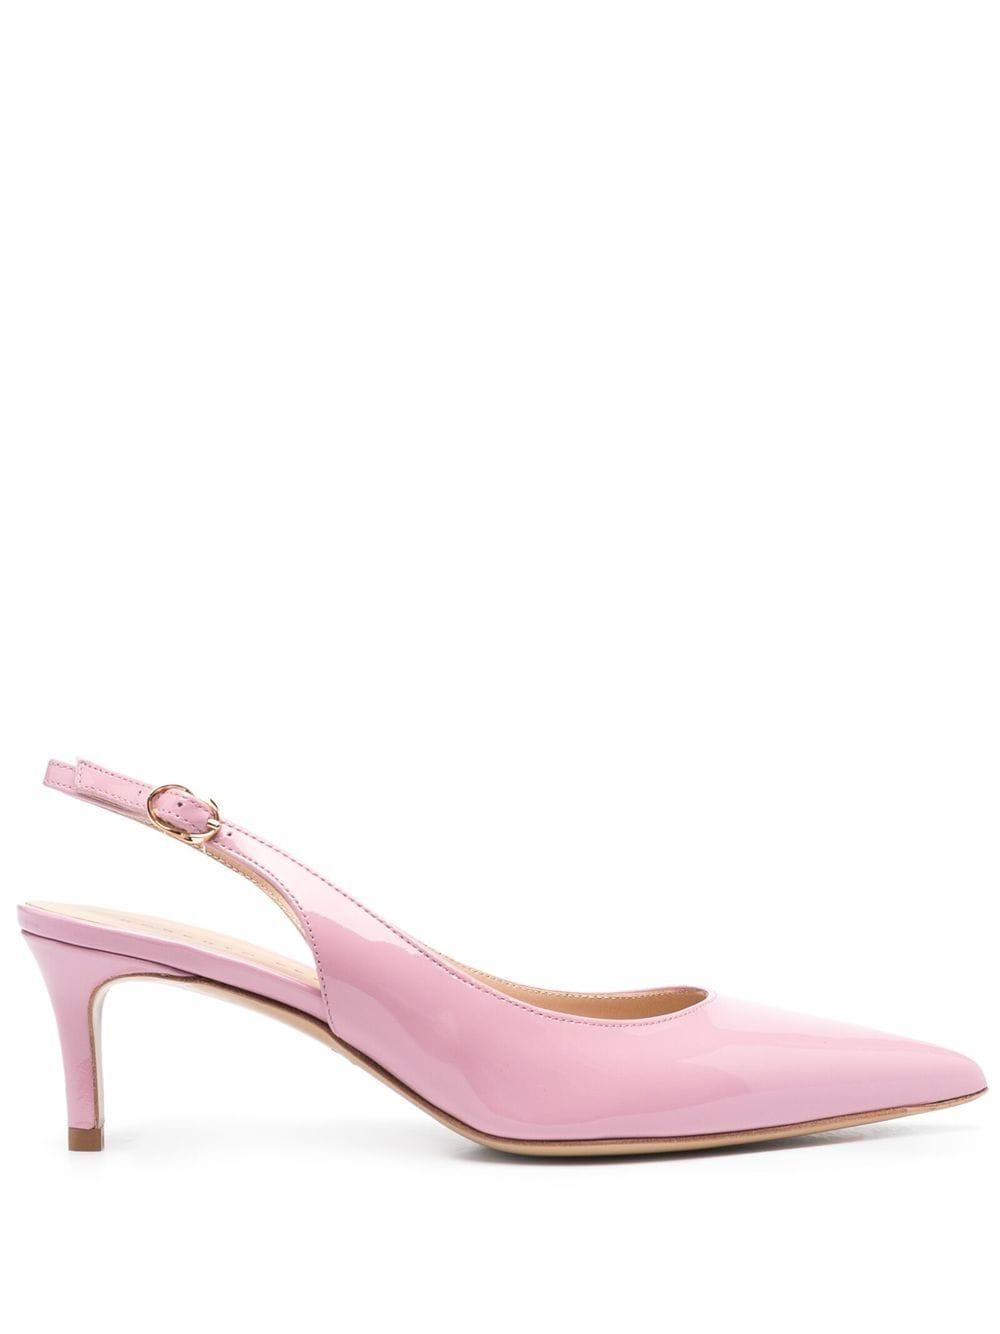 Roberto Festa Bonaire Patent-leather Slingback Pumps in Pink | Lyst